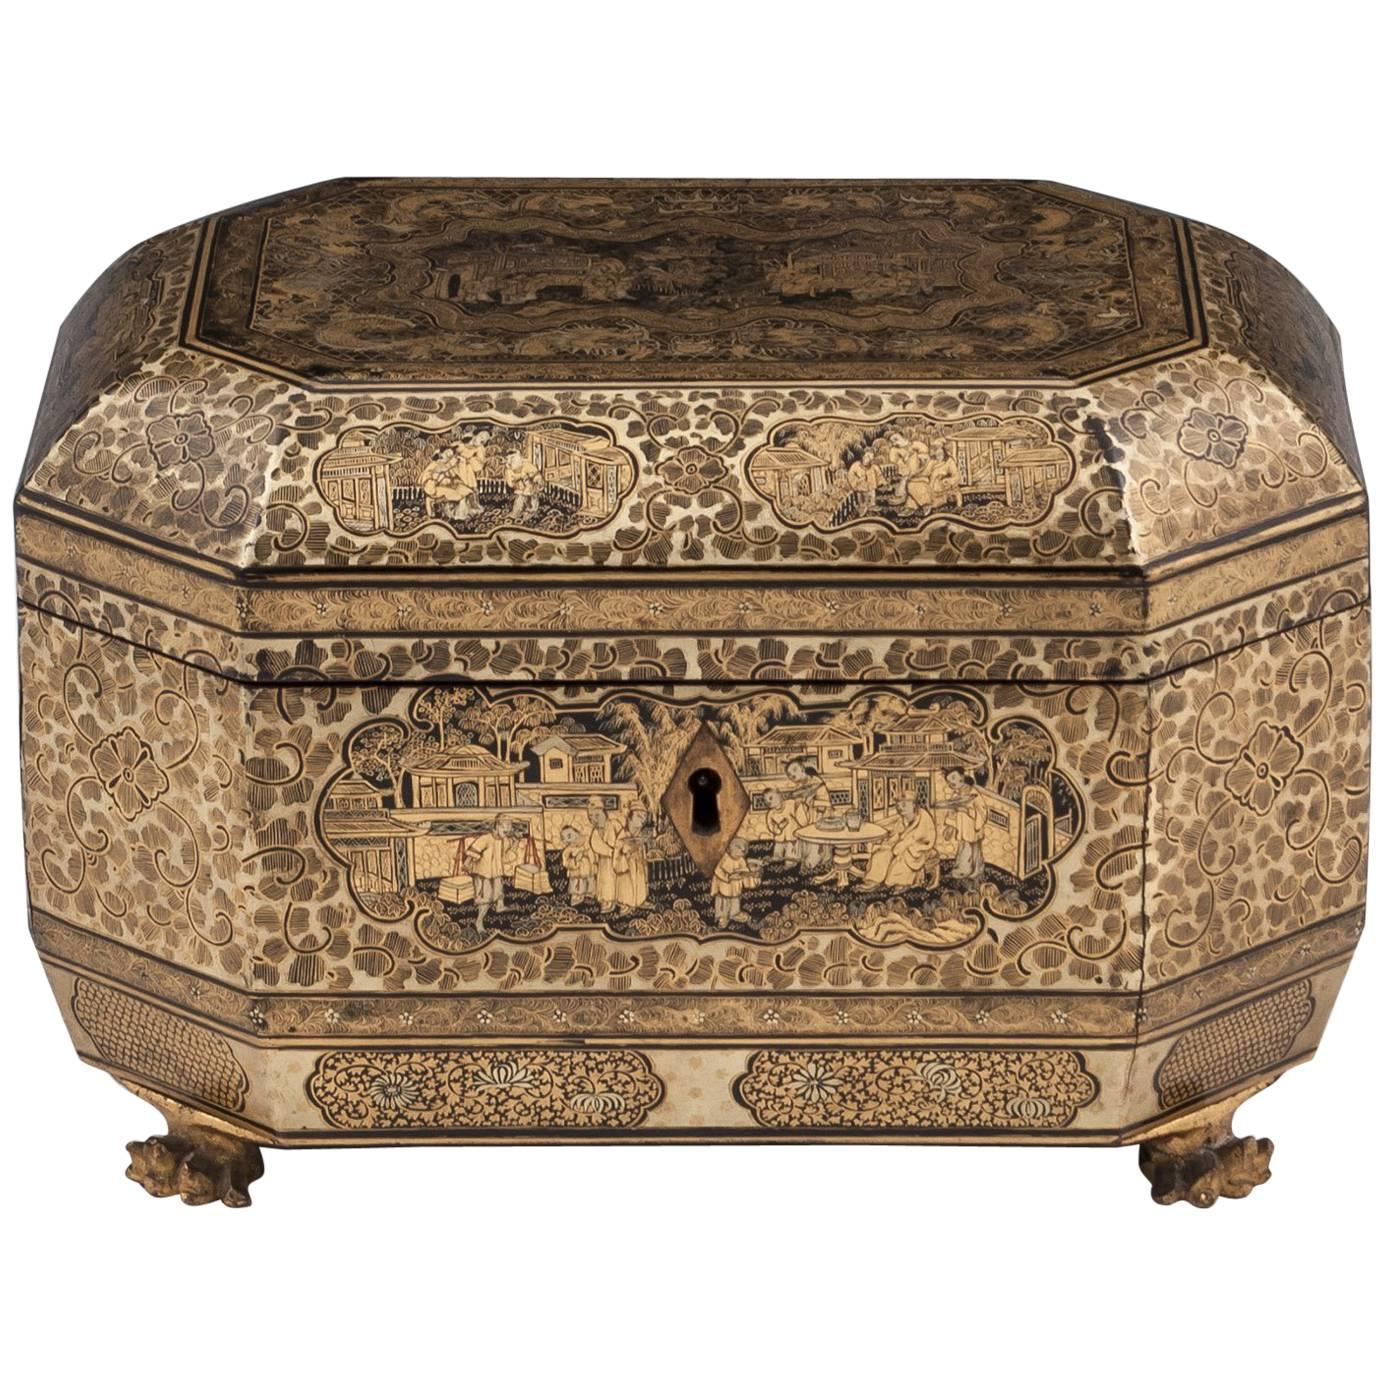 Antique Chinese Lacquer Tea Chest, 19th Century